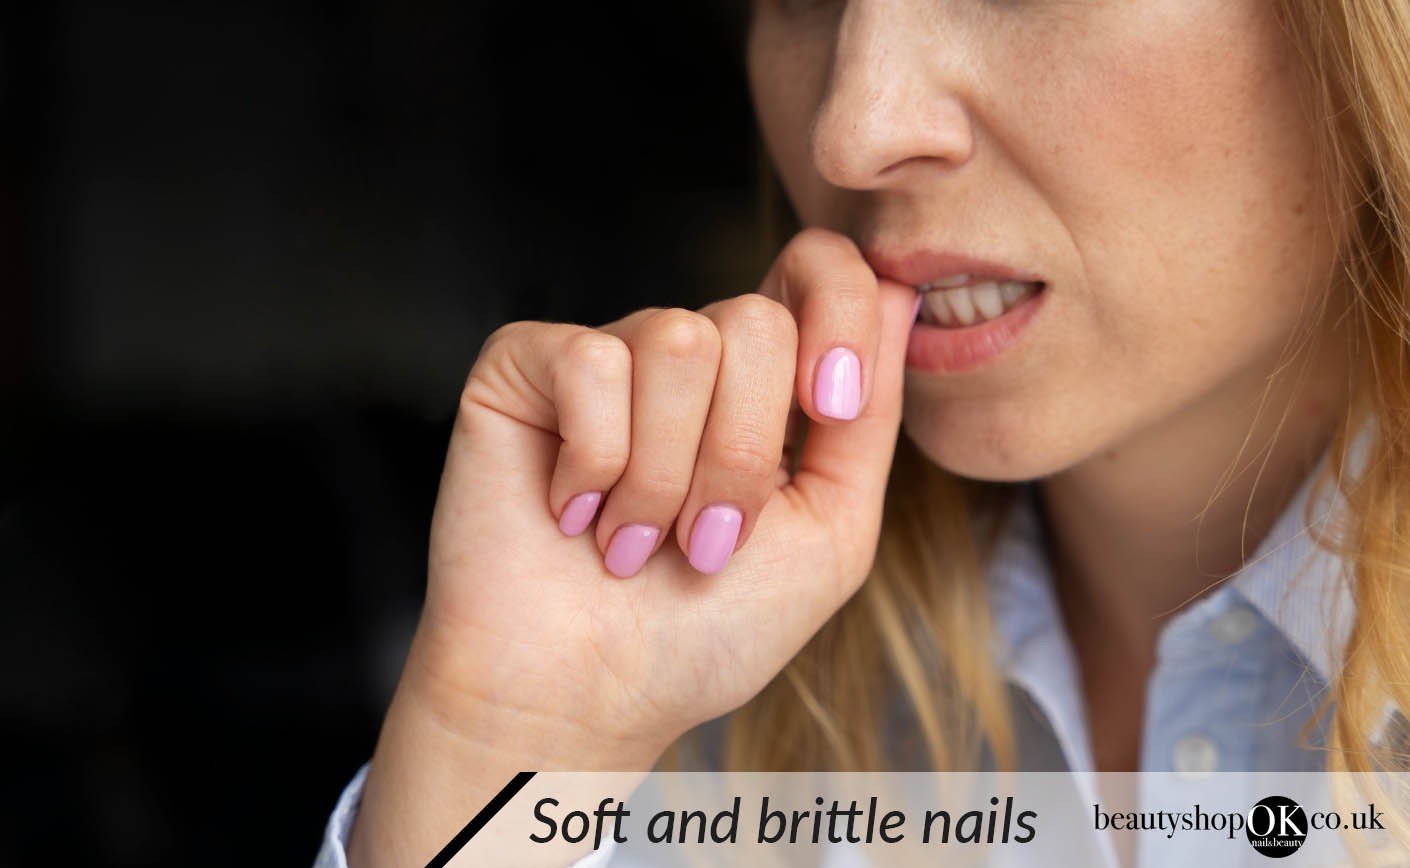 Soft and brittle nails - What am I doing wrong?